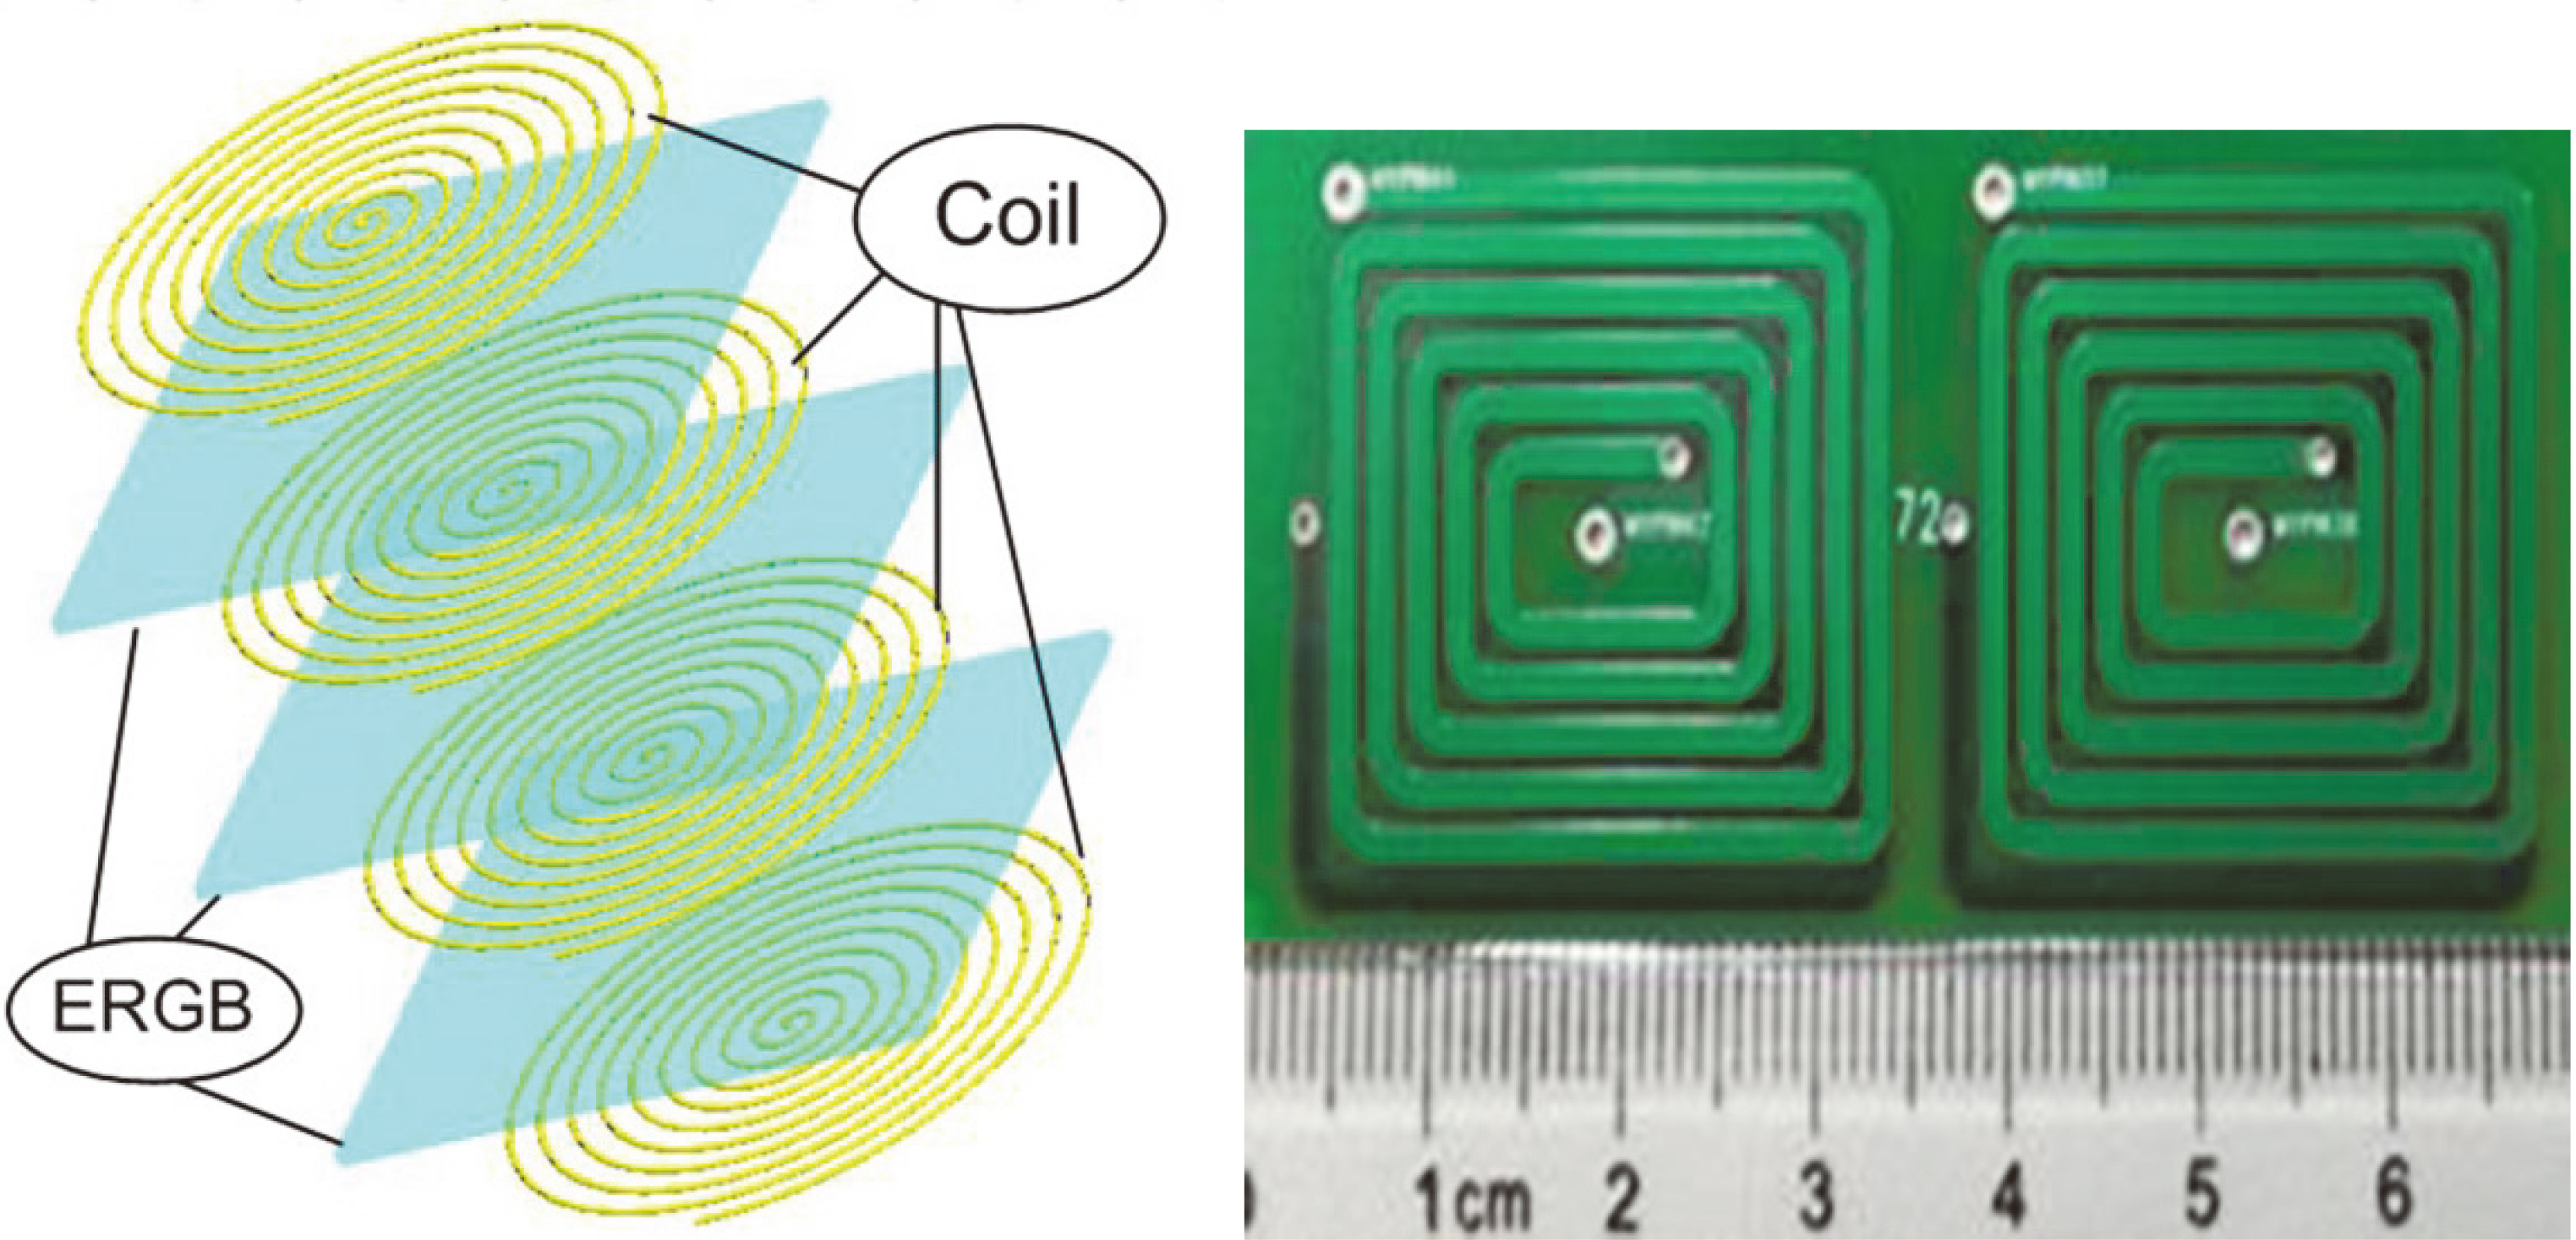 Structure of four-layer coil used as resonance antenna.